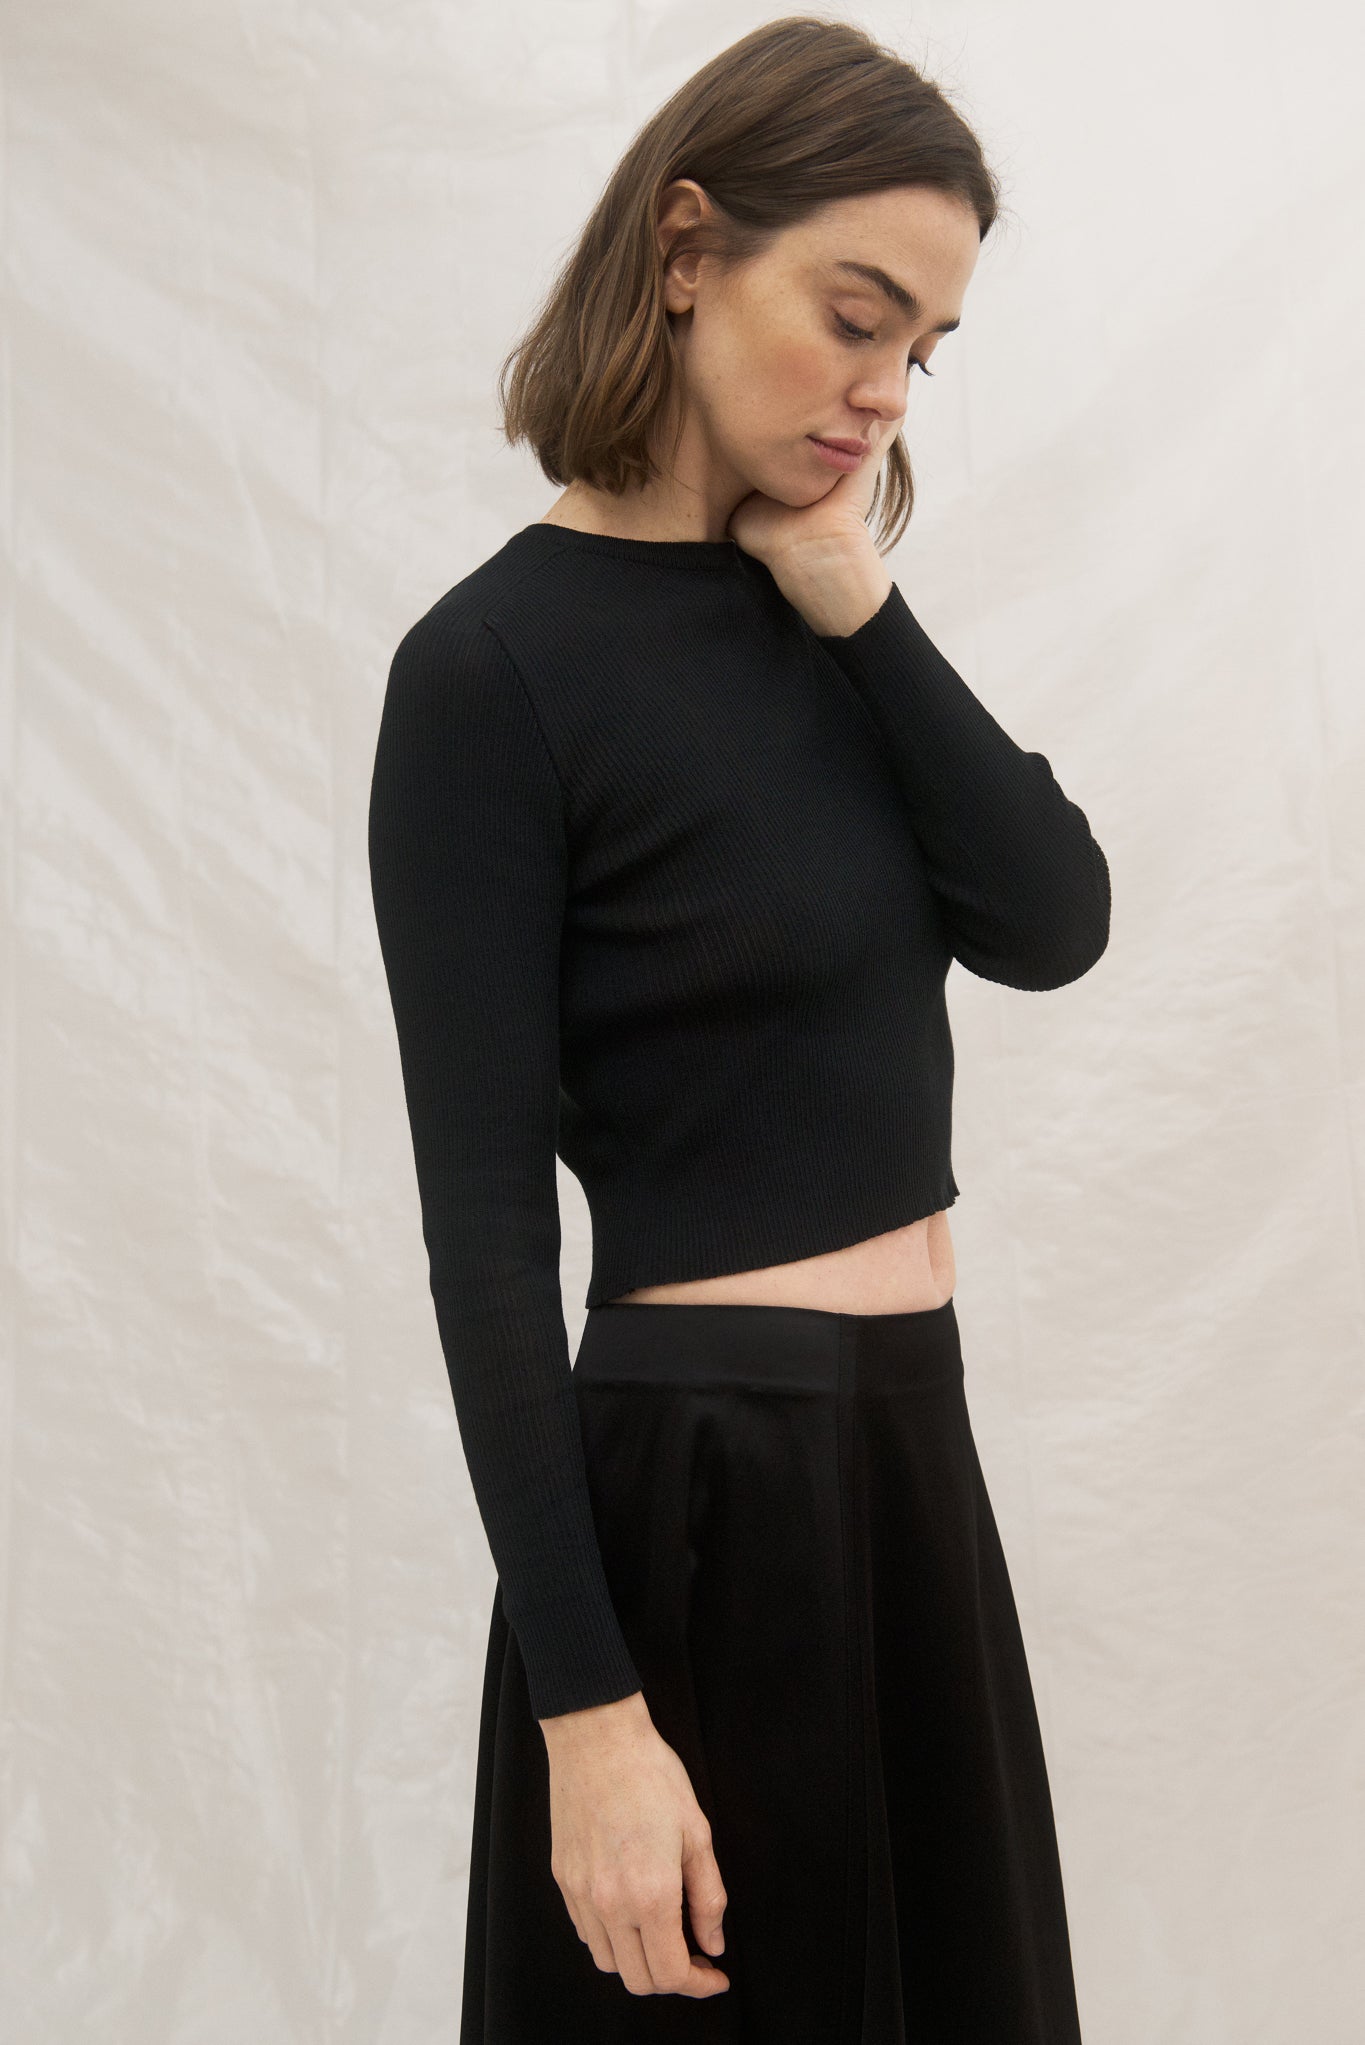 Cropped Top in Black